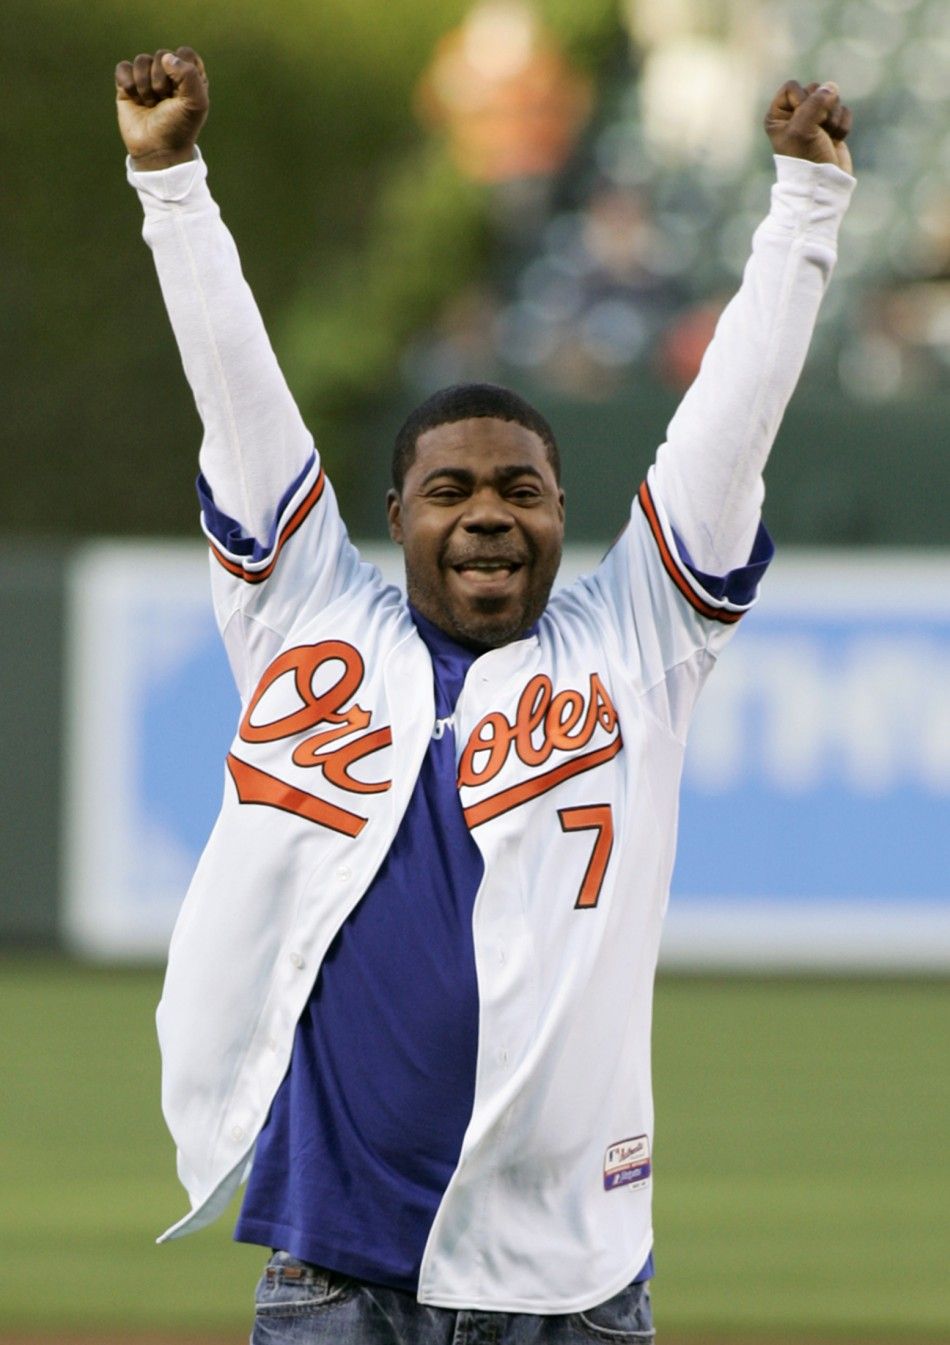 Actor and comedian Tracy Morgan, star of the NBC show quot30 Rockquot, raises his arms after throwing out the ceremonial first pitch before the MLB American League baseball game between the New York Yankees and Baltimore Orioles in Baltimore, Maryland